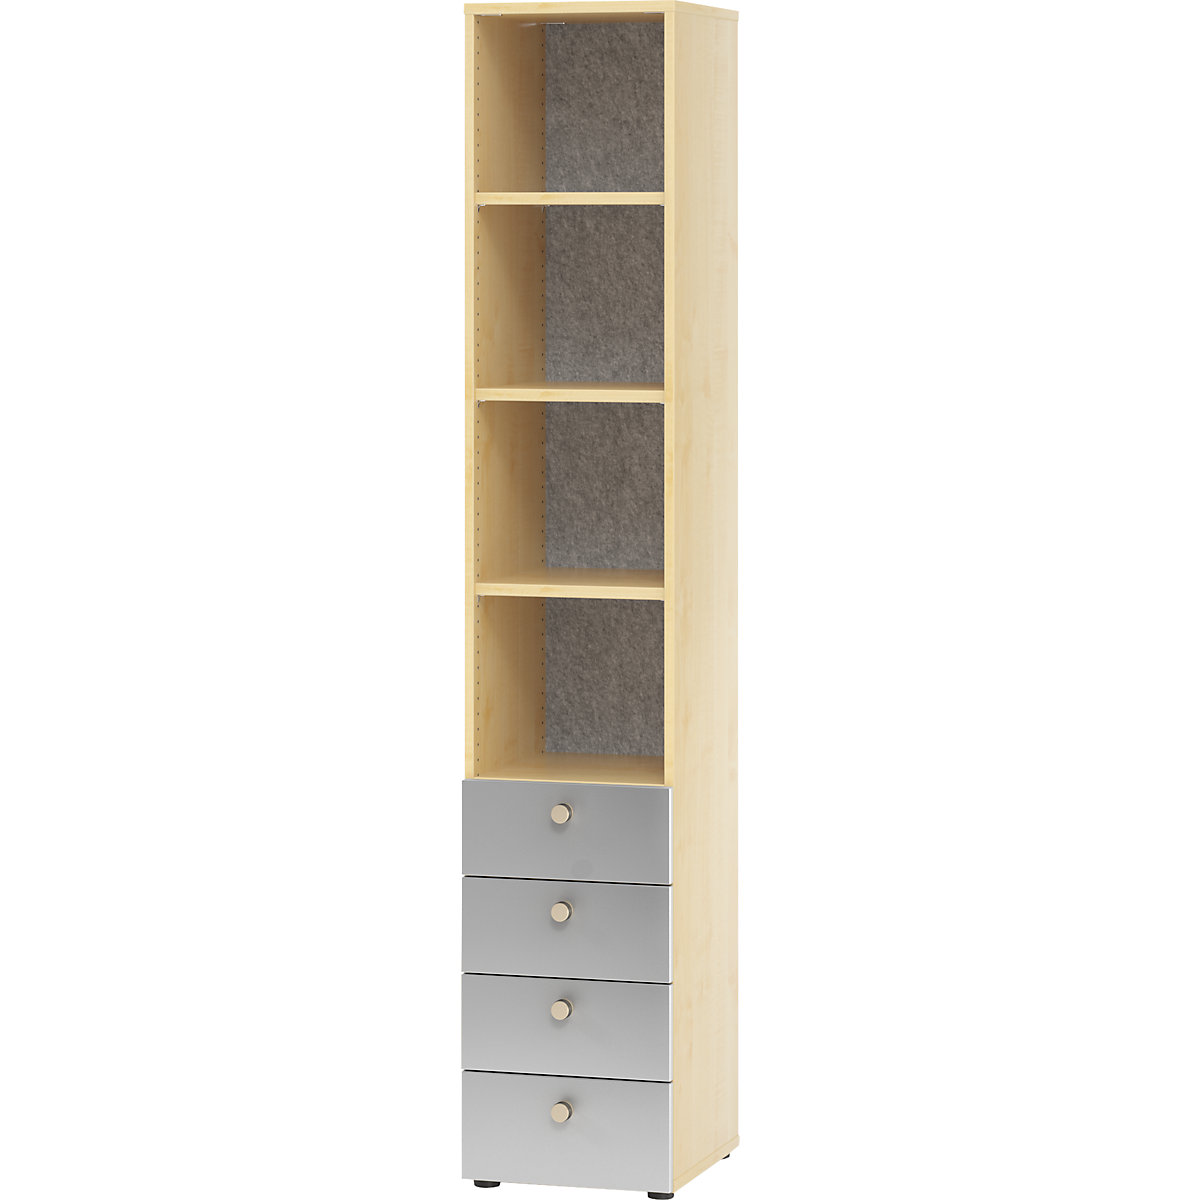 Combination cupboard with acoustic rear panel ANNY-AC, 5 shelves, 4 drawers, maple finish-8